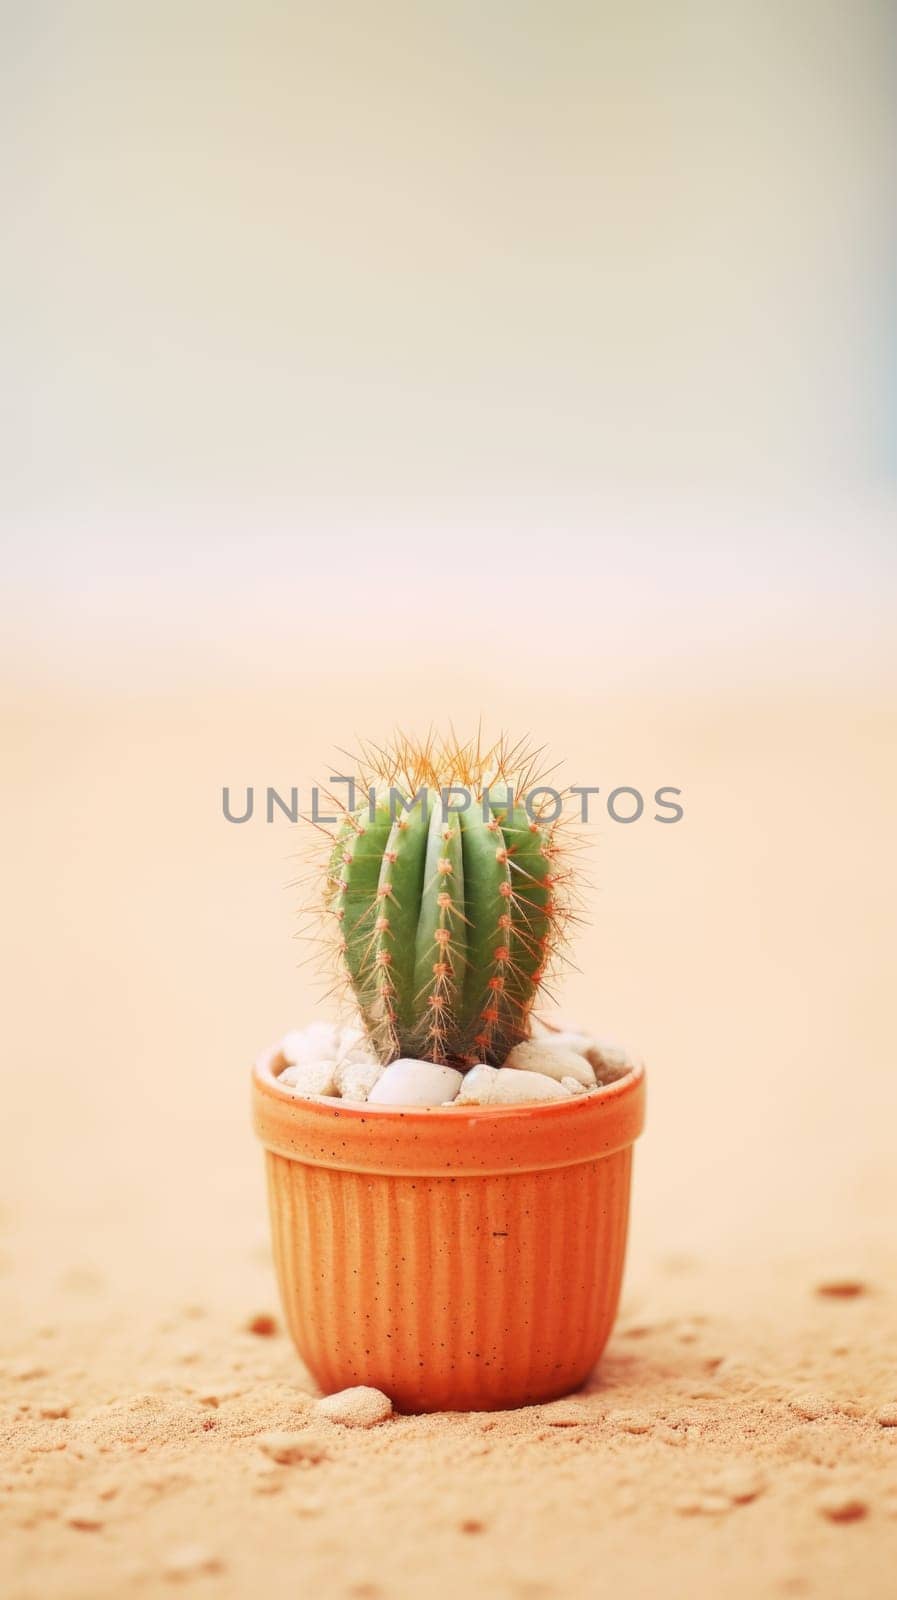 Small cactus in a pot on a sandy surface